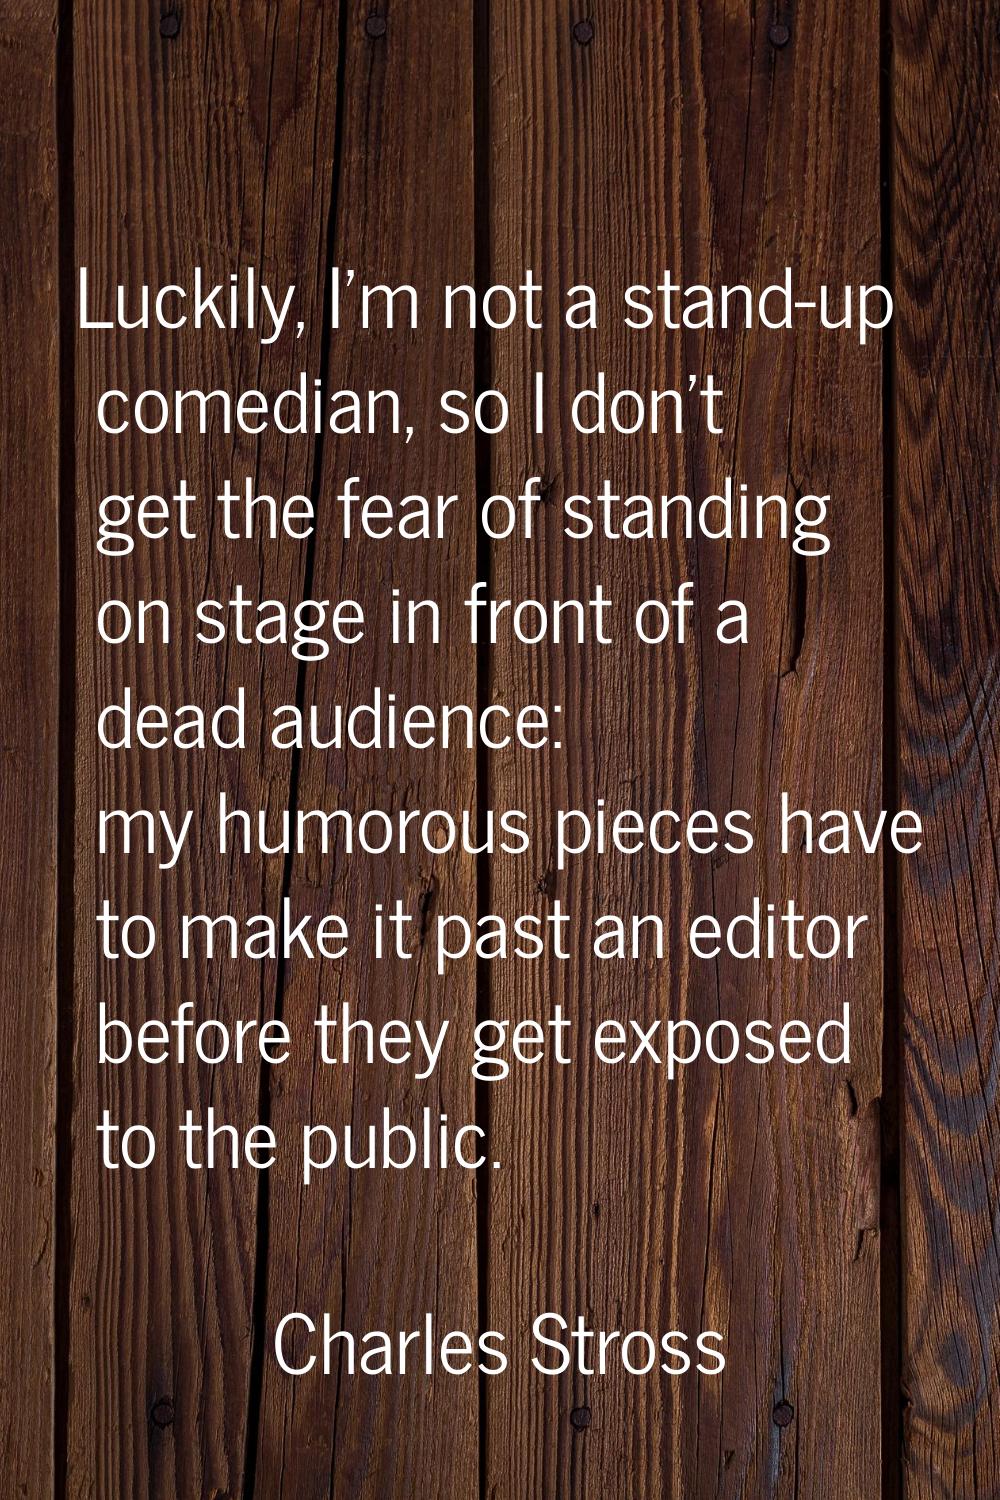 Luckily, I'm not a stand-up comedian, so I don't get the fear of standing on stage in front of a de